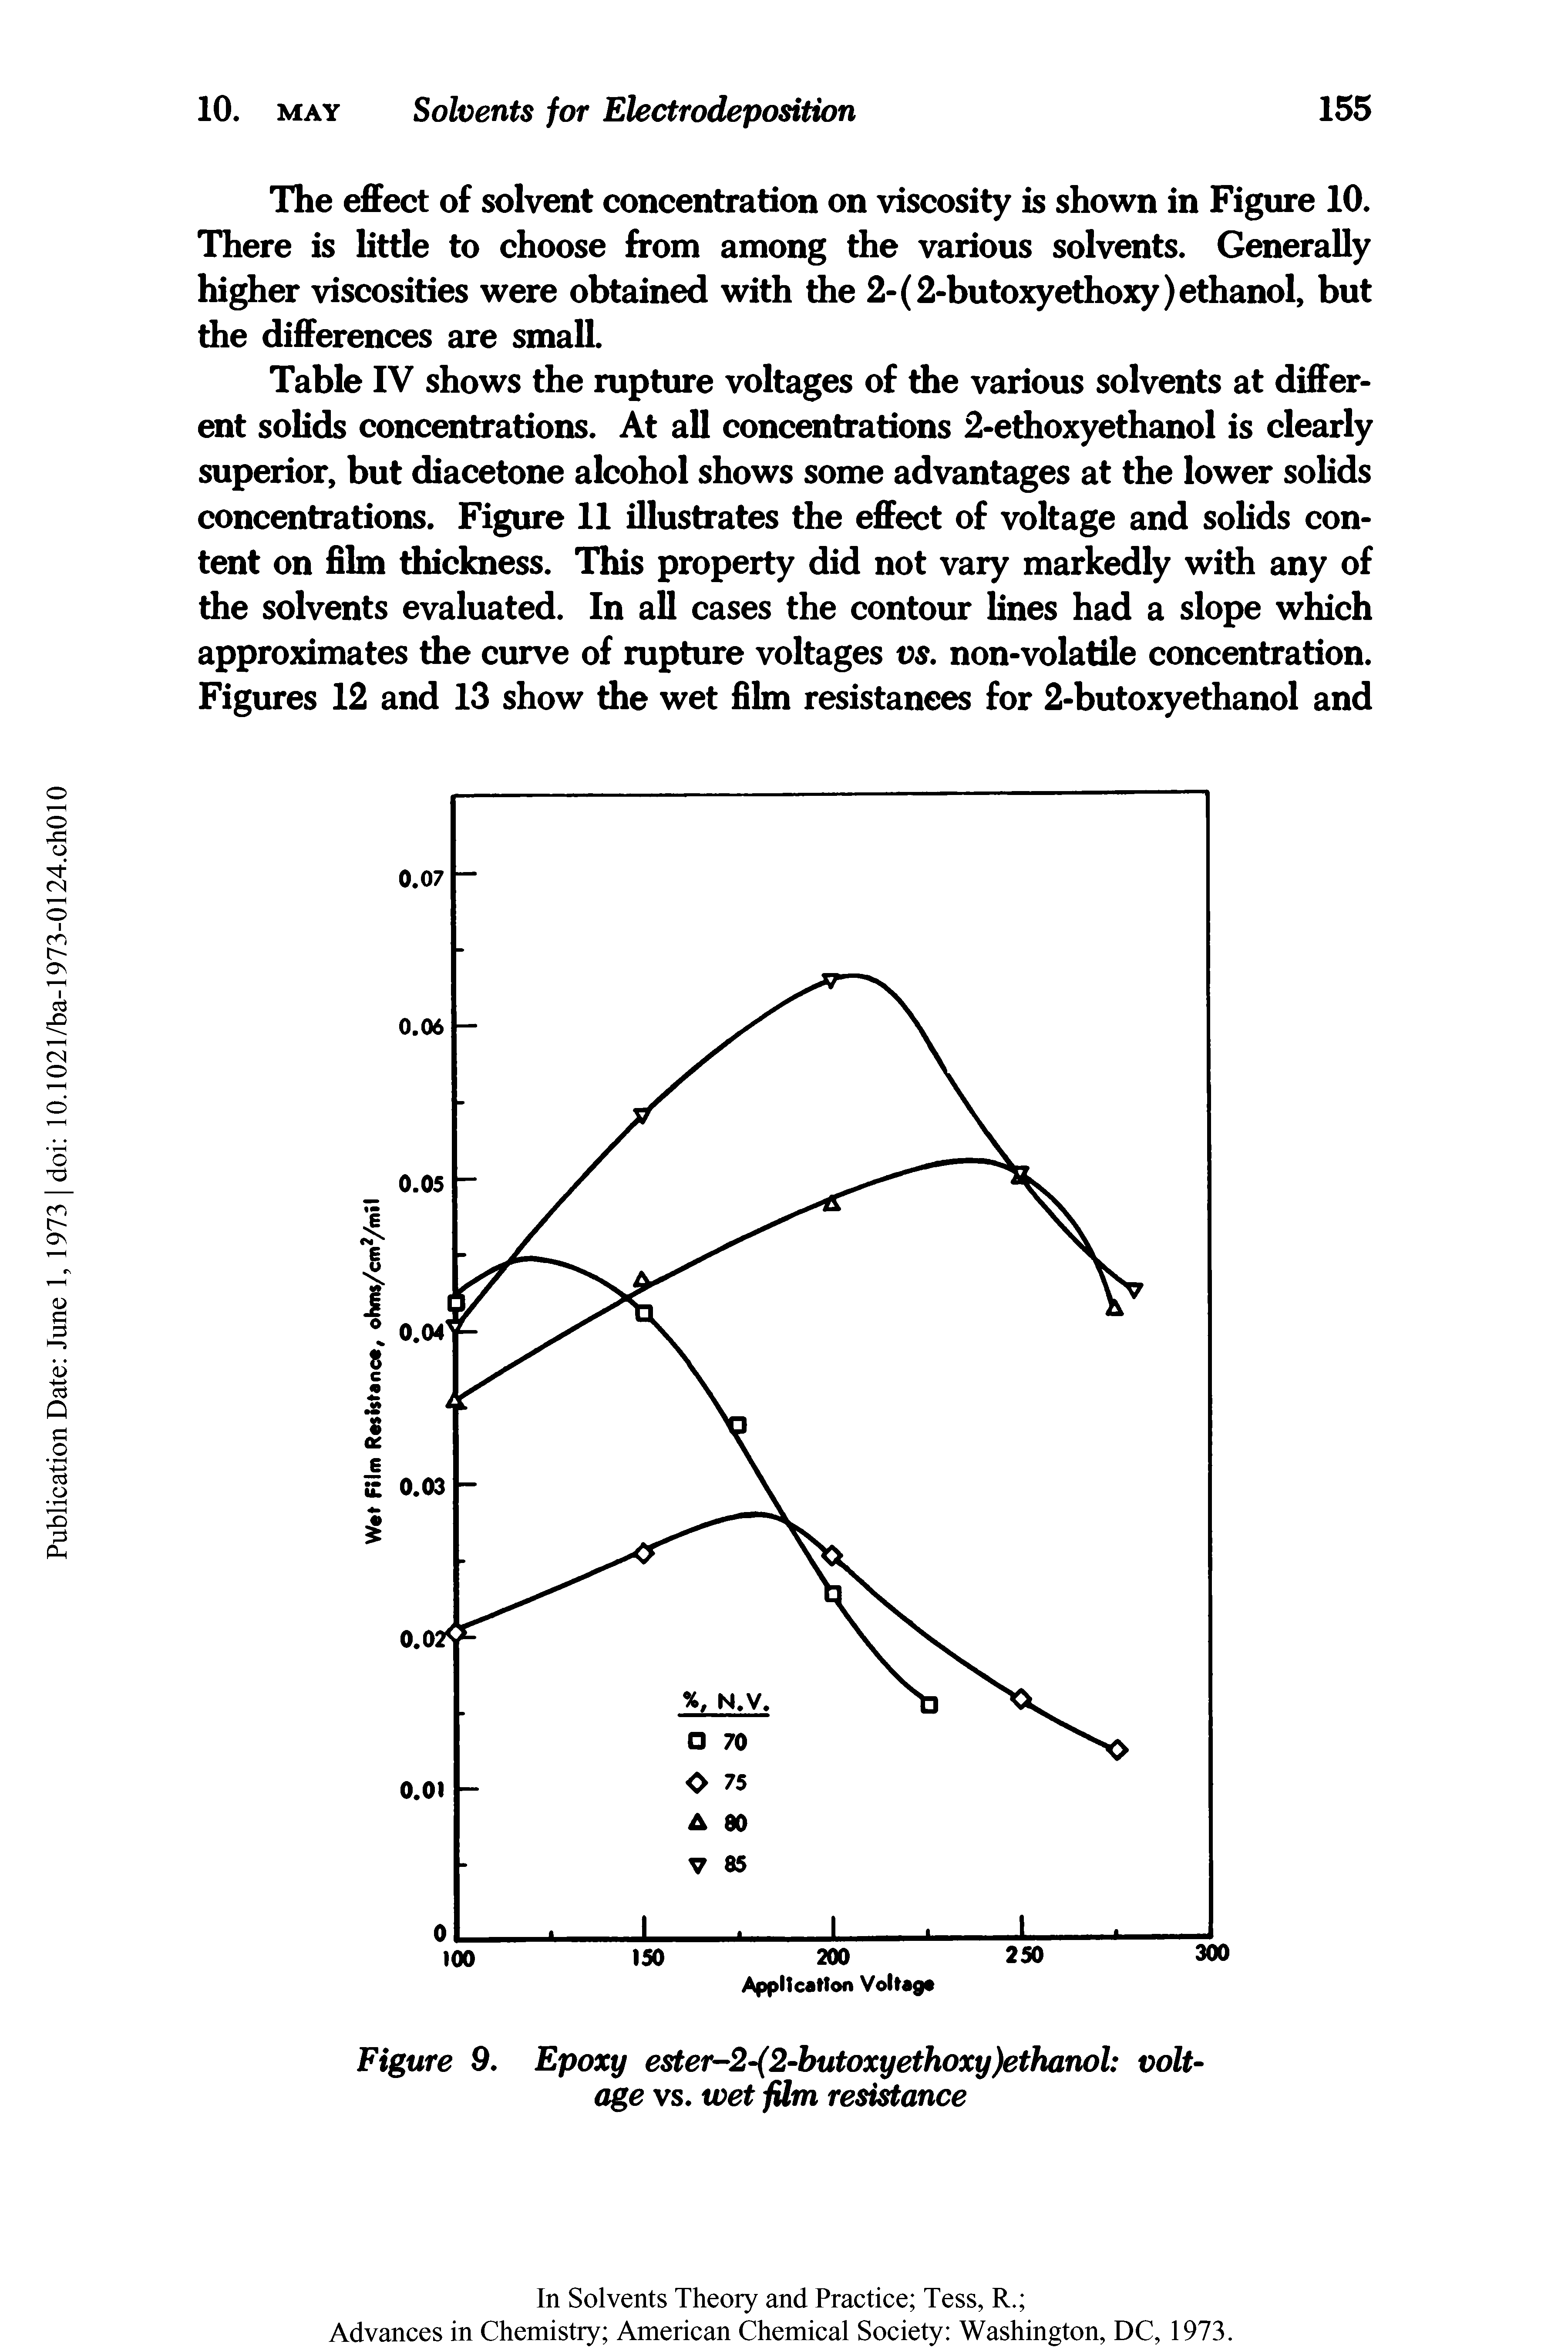 Table IV shows the rupture voltages of the various solvents at different solids concentrations. At all concentrations 2-ethoxyethanol is clearly superior, but diacetone alcohol shows some advantages at the lower solids concentrations. Figure 11 illustrates the effect of voltage and solids content on film thickness. This property did not vary markedly with any of the solvents evaluated. In all cases the contour lines had a slope which approximates the curve of rupture voltages vs. non-volatile concentration. Figures 12 and 13 show the wet film resistances for 2-butoxyethanol and...